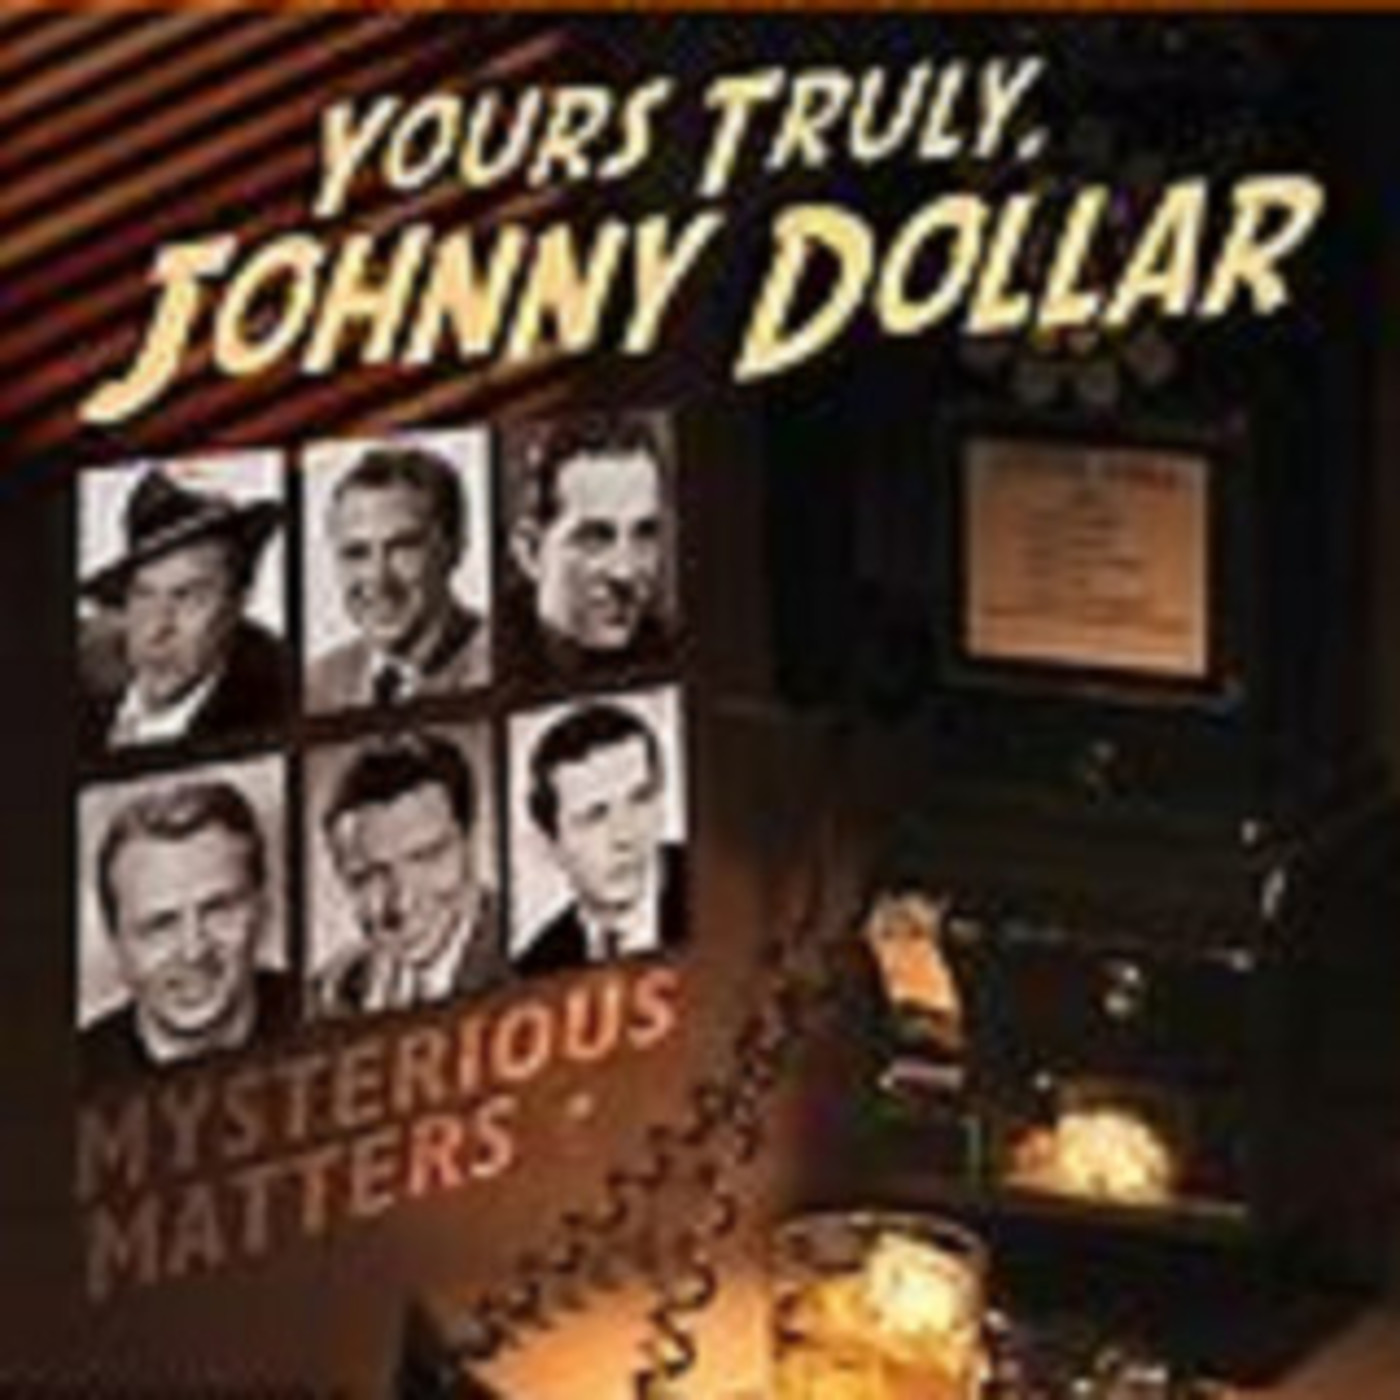 Yours Truly, Johnny Dollar - 051461, episode 740 - The Simple Simon Matter